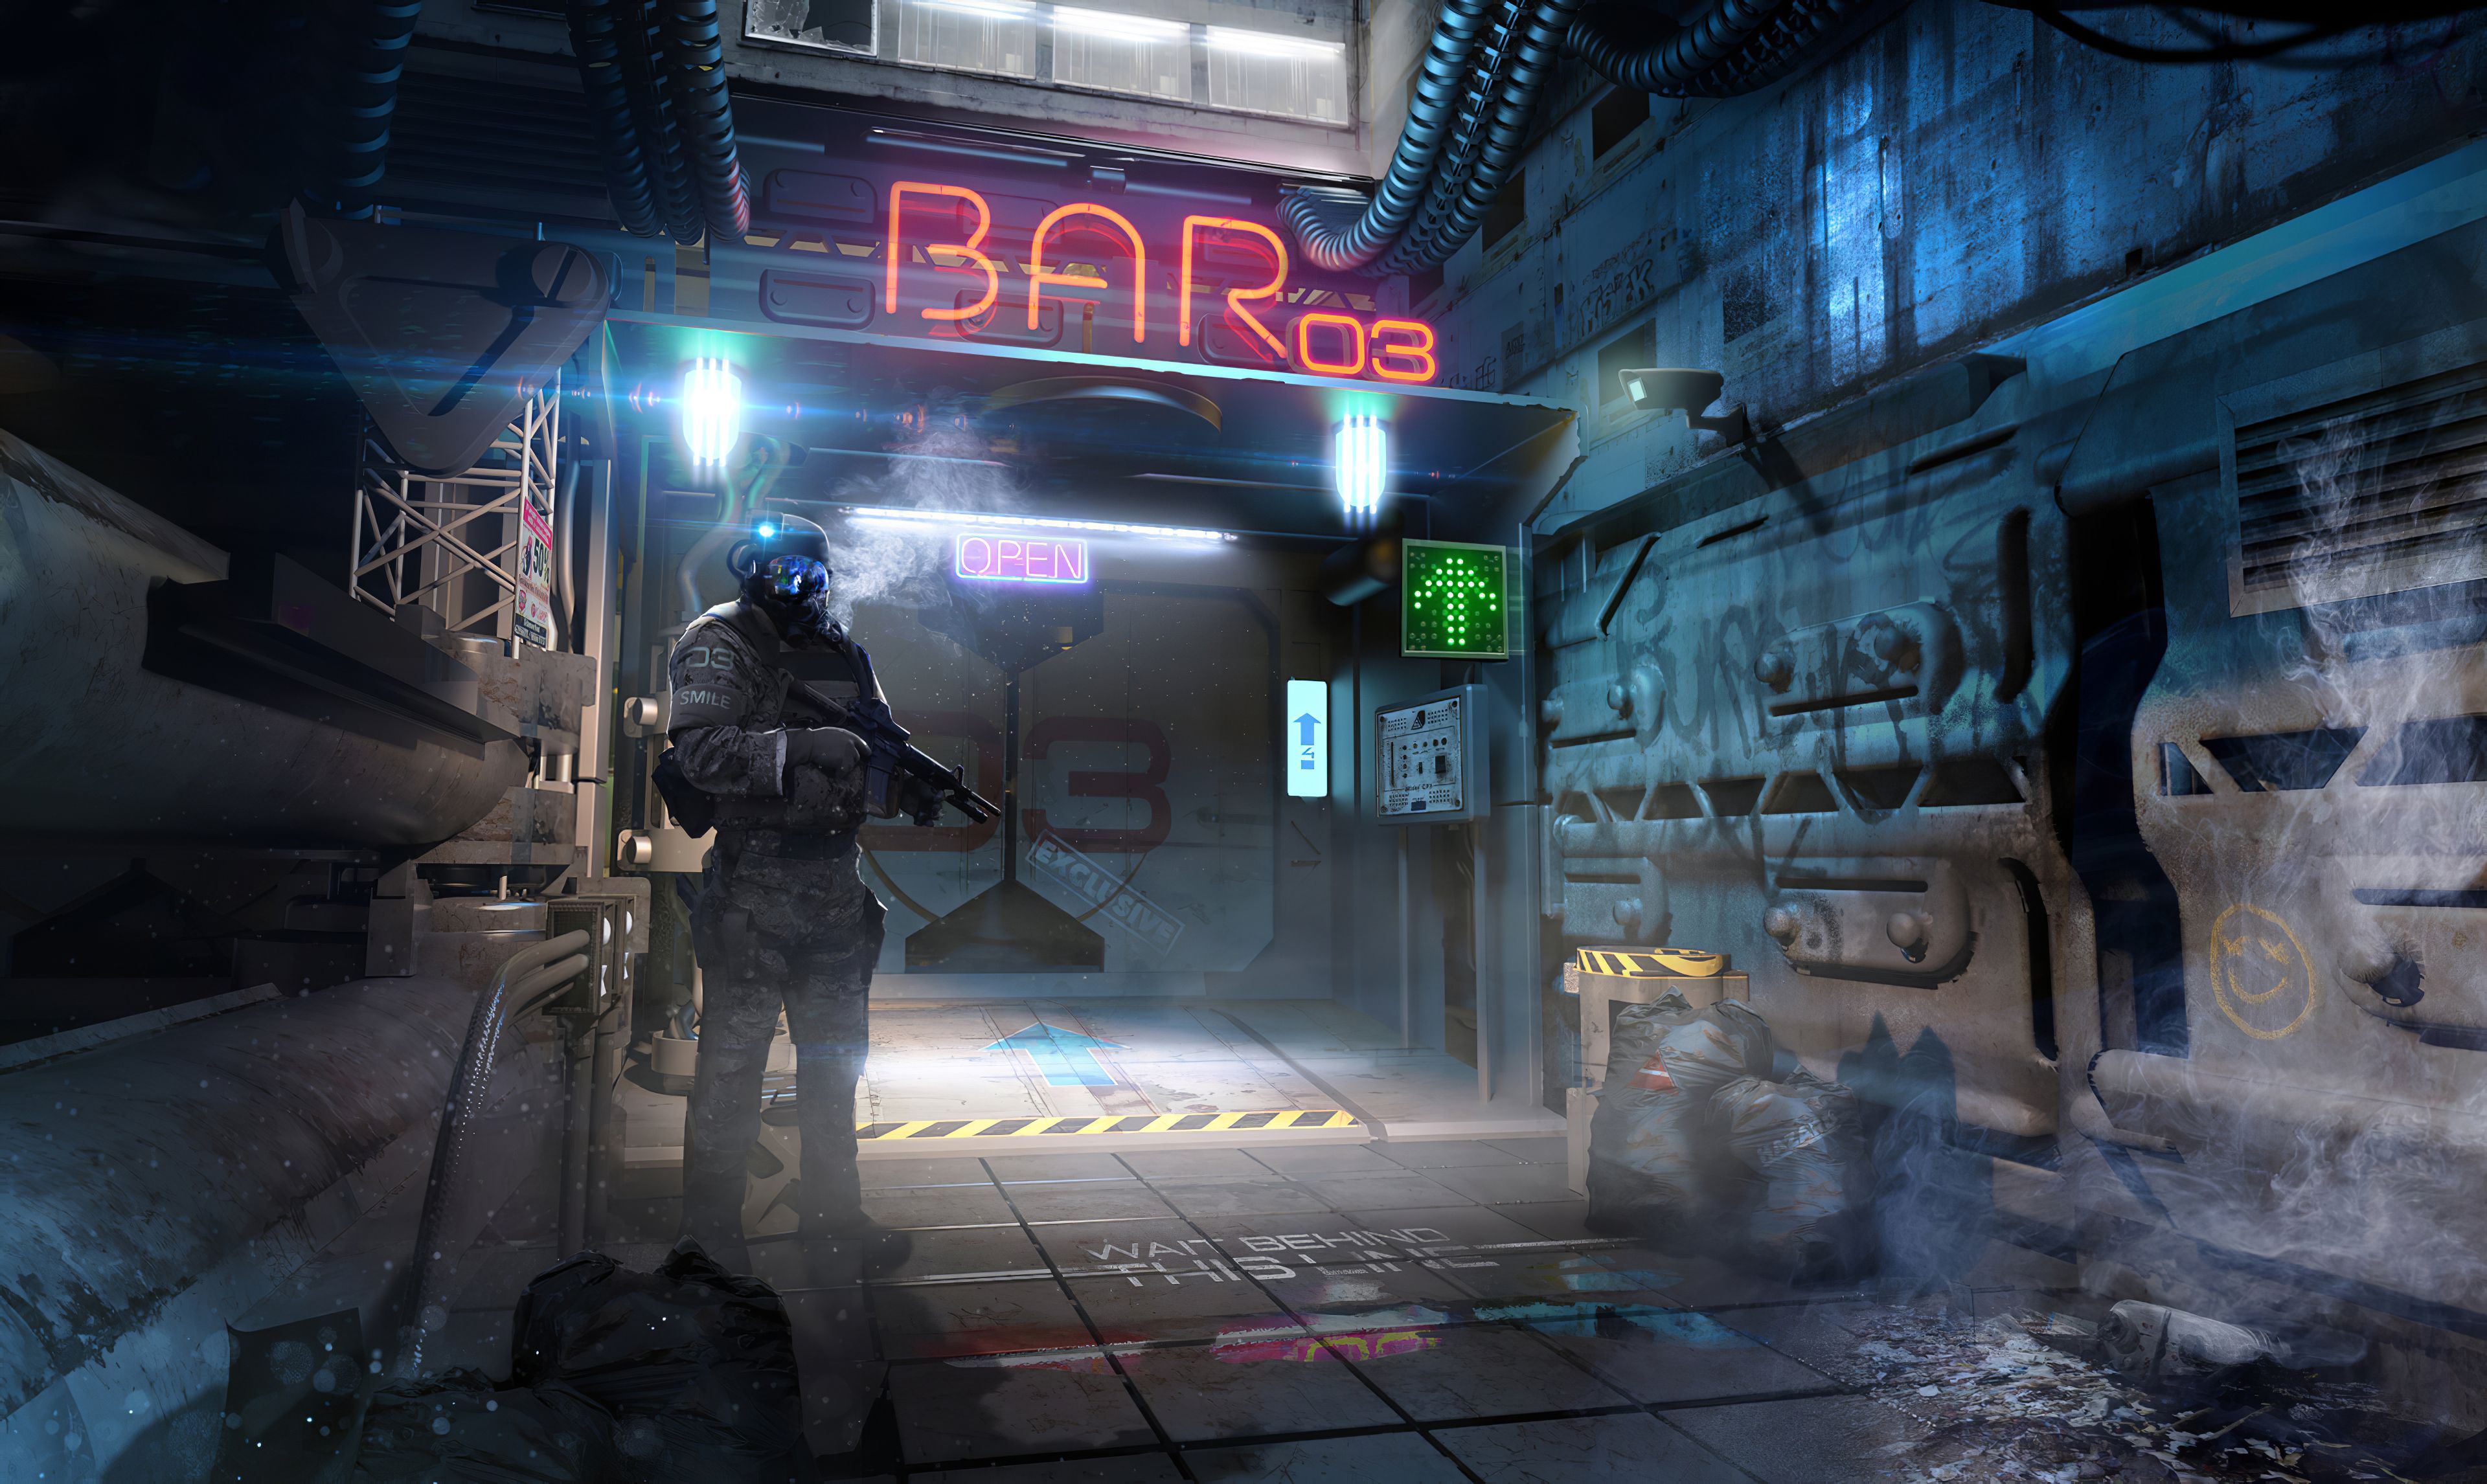 Alleyway Cyberpunk Bar 4k, HD Artist, 4k Wallpaper, Image, Background, Photo and Picture